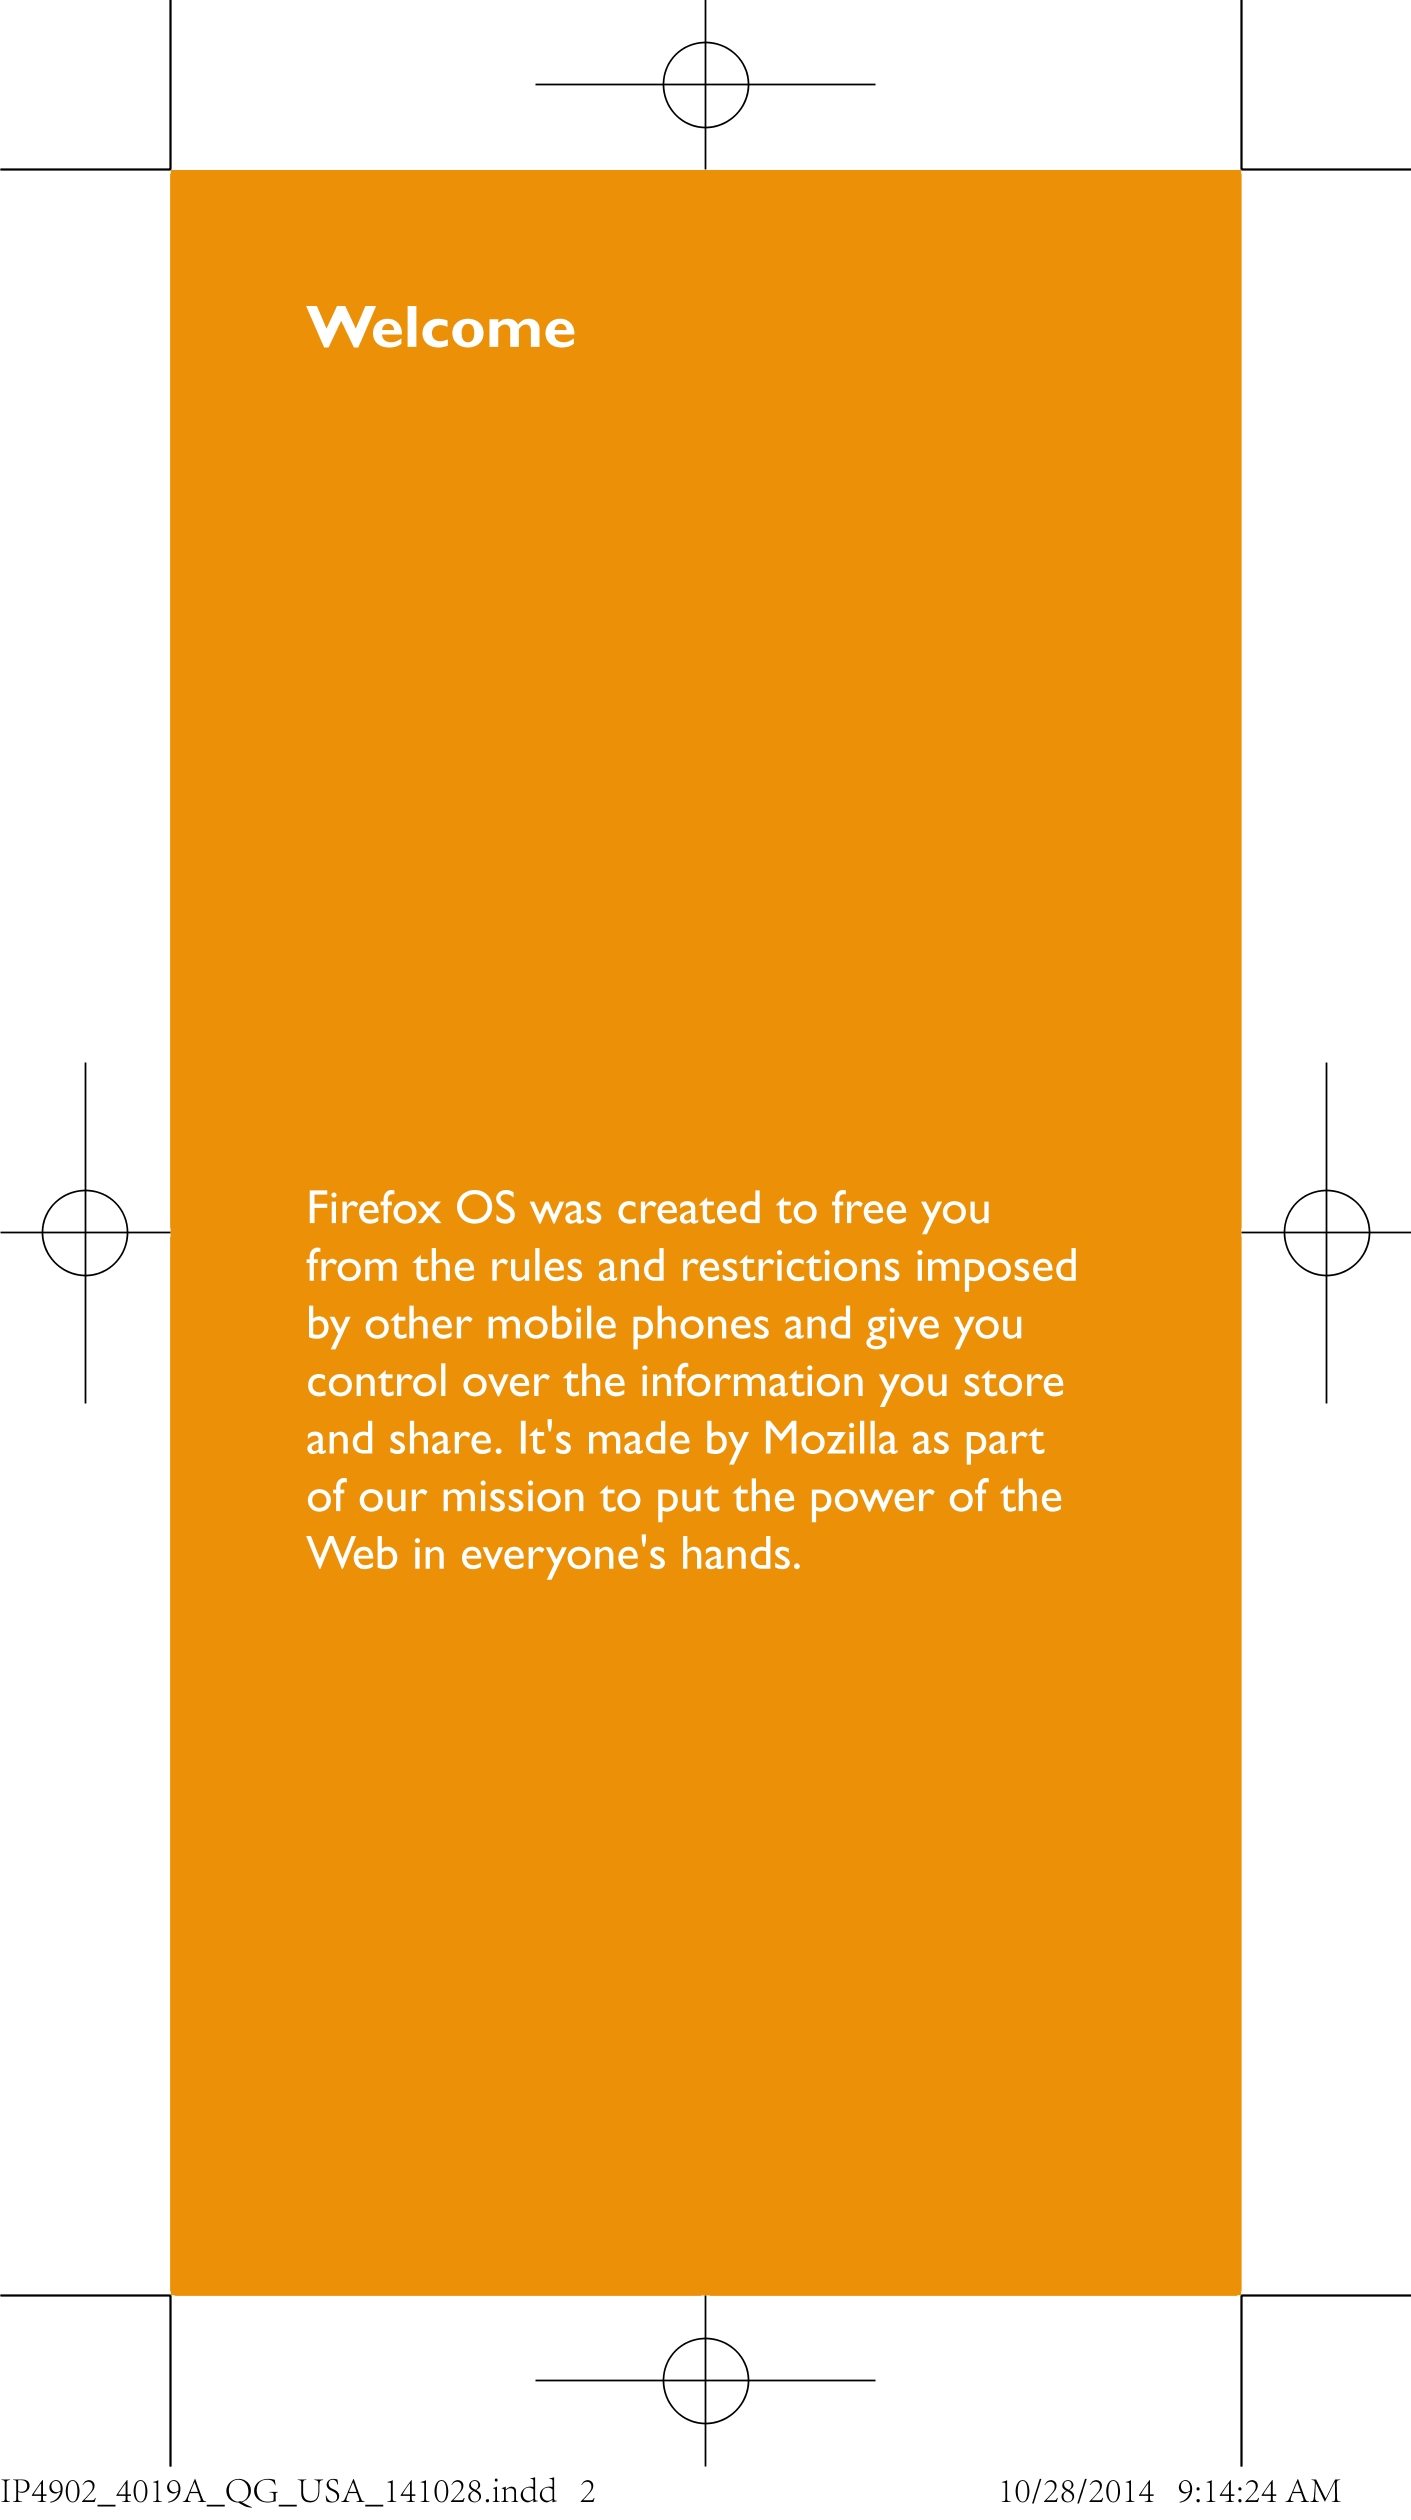 Welcome
Firefox OS was created to free you 
from the rules and restrictions imposed 
by other mobile phones and give you 
contro